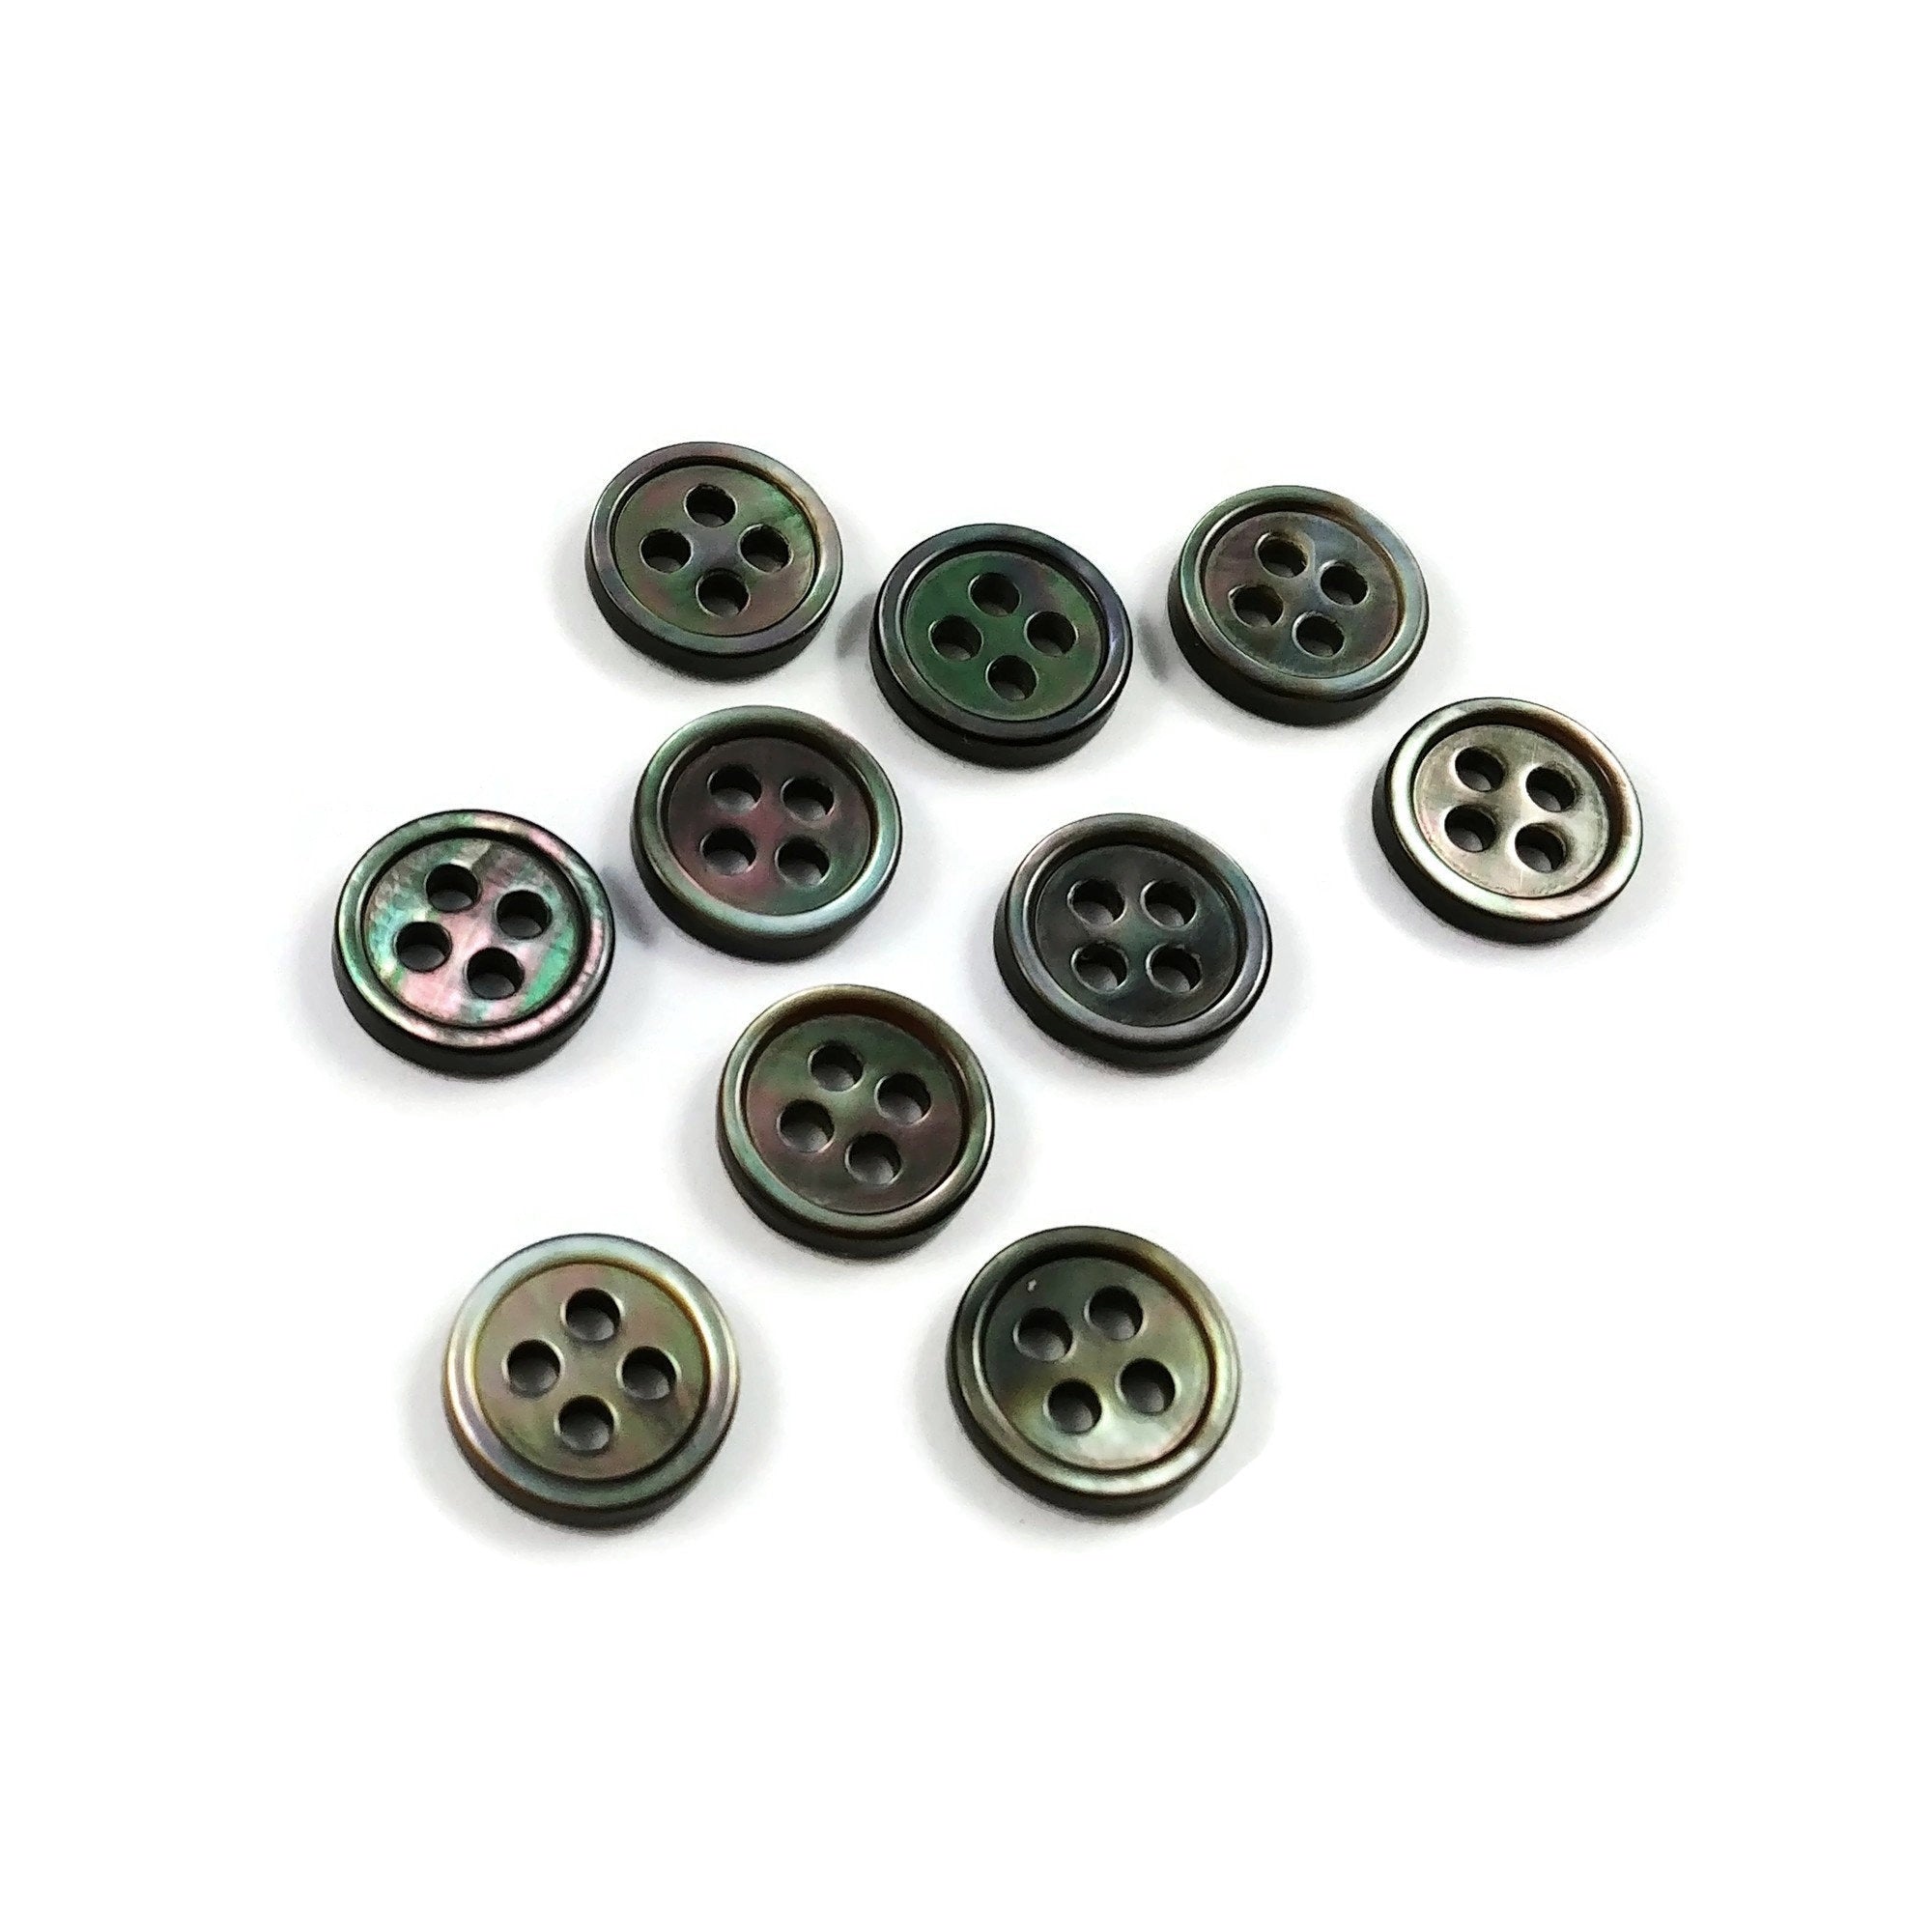 Grey Buttons for Crafts Bulk, 2 and 4 Holes for Sewing Supplies